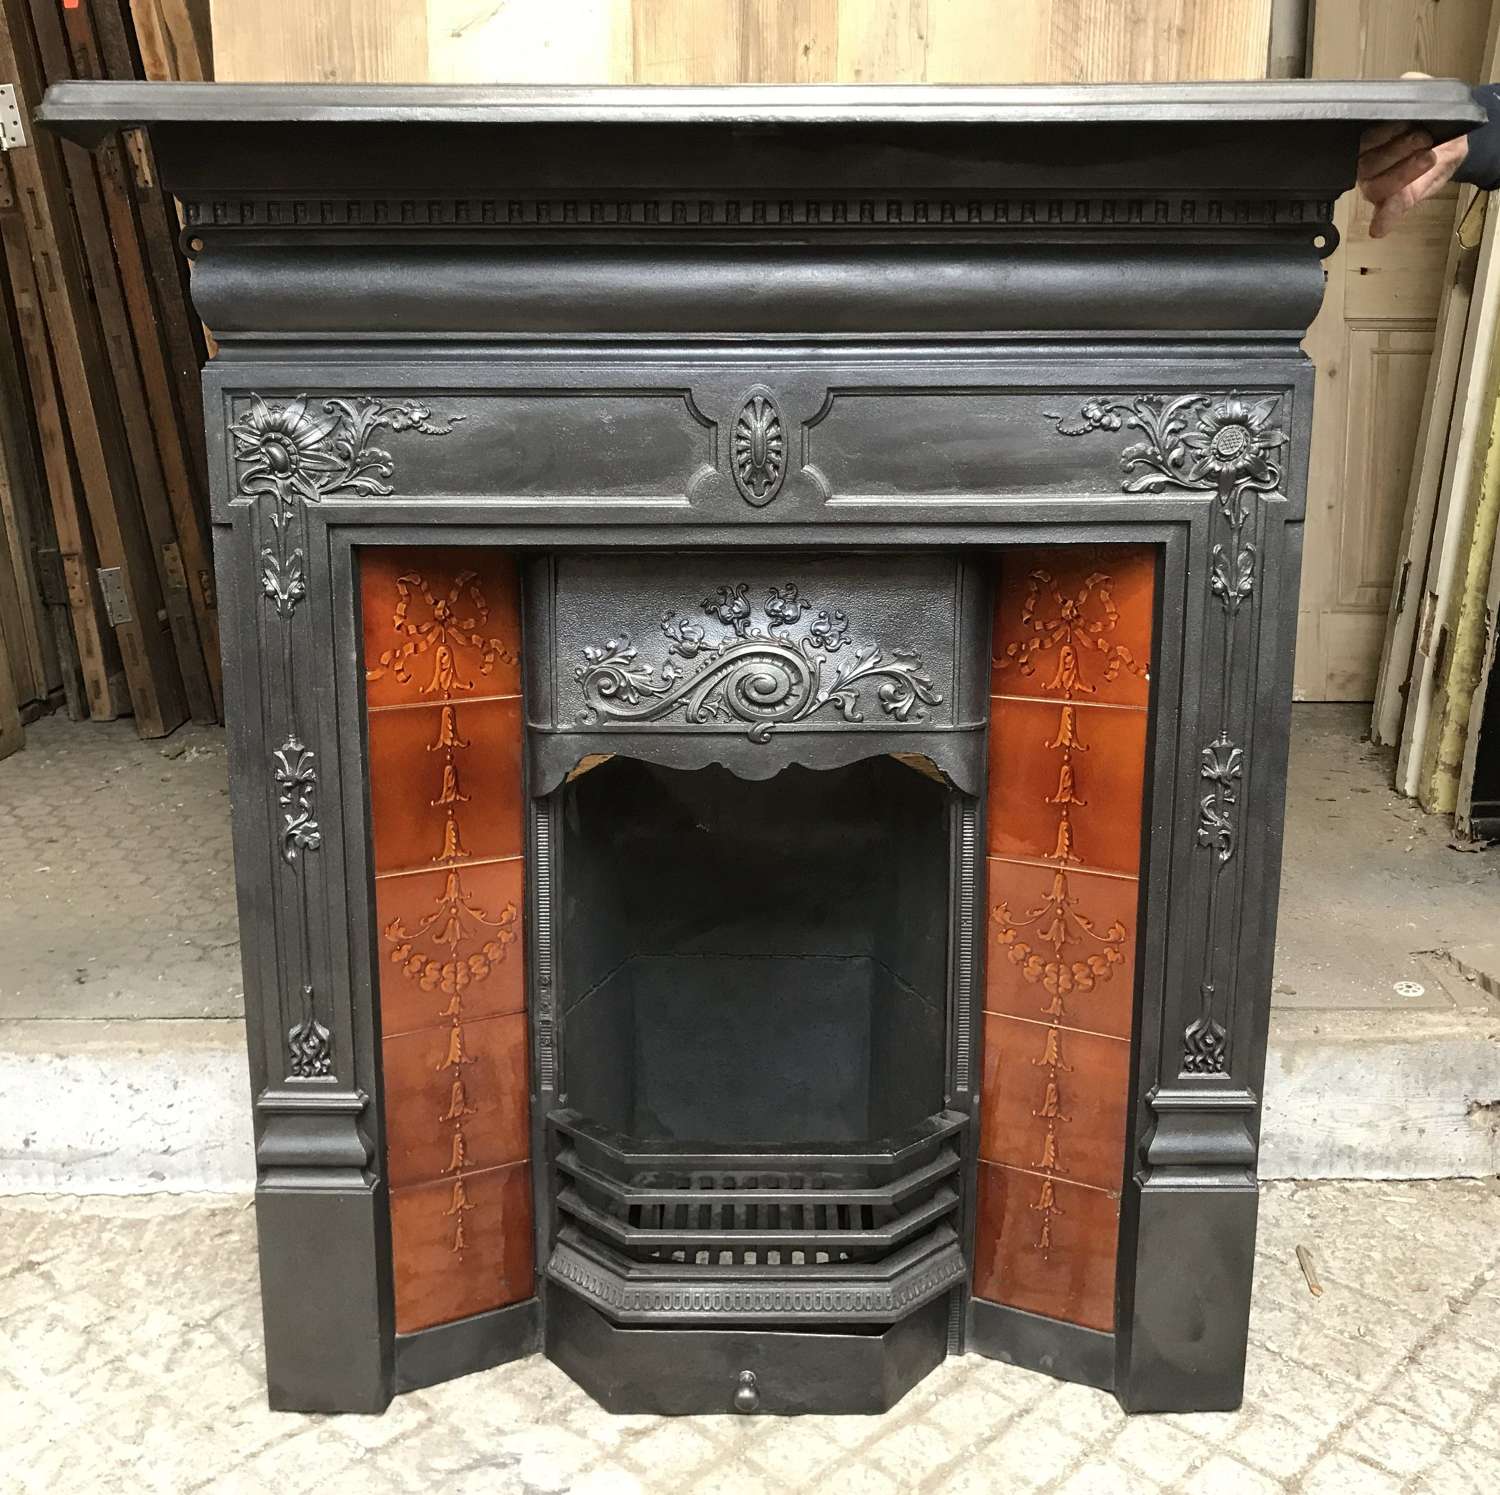 FC0084 A RECLAIMED LATE VICTORIAN TILED FIRE INSERT WITH BRICK & STOOL